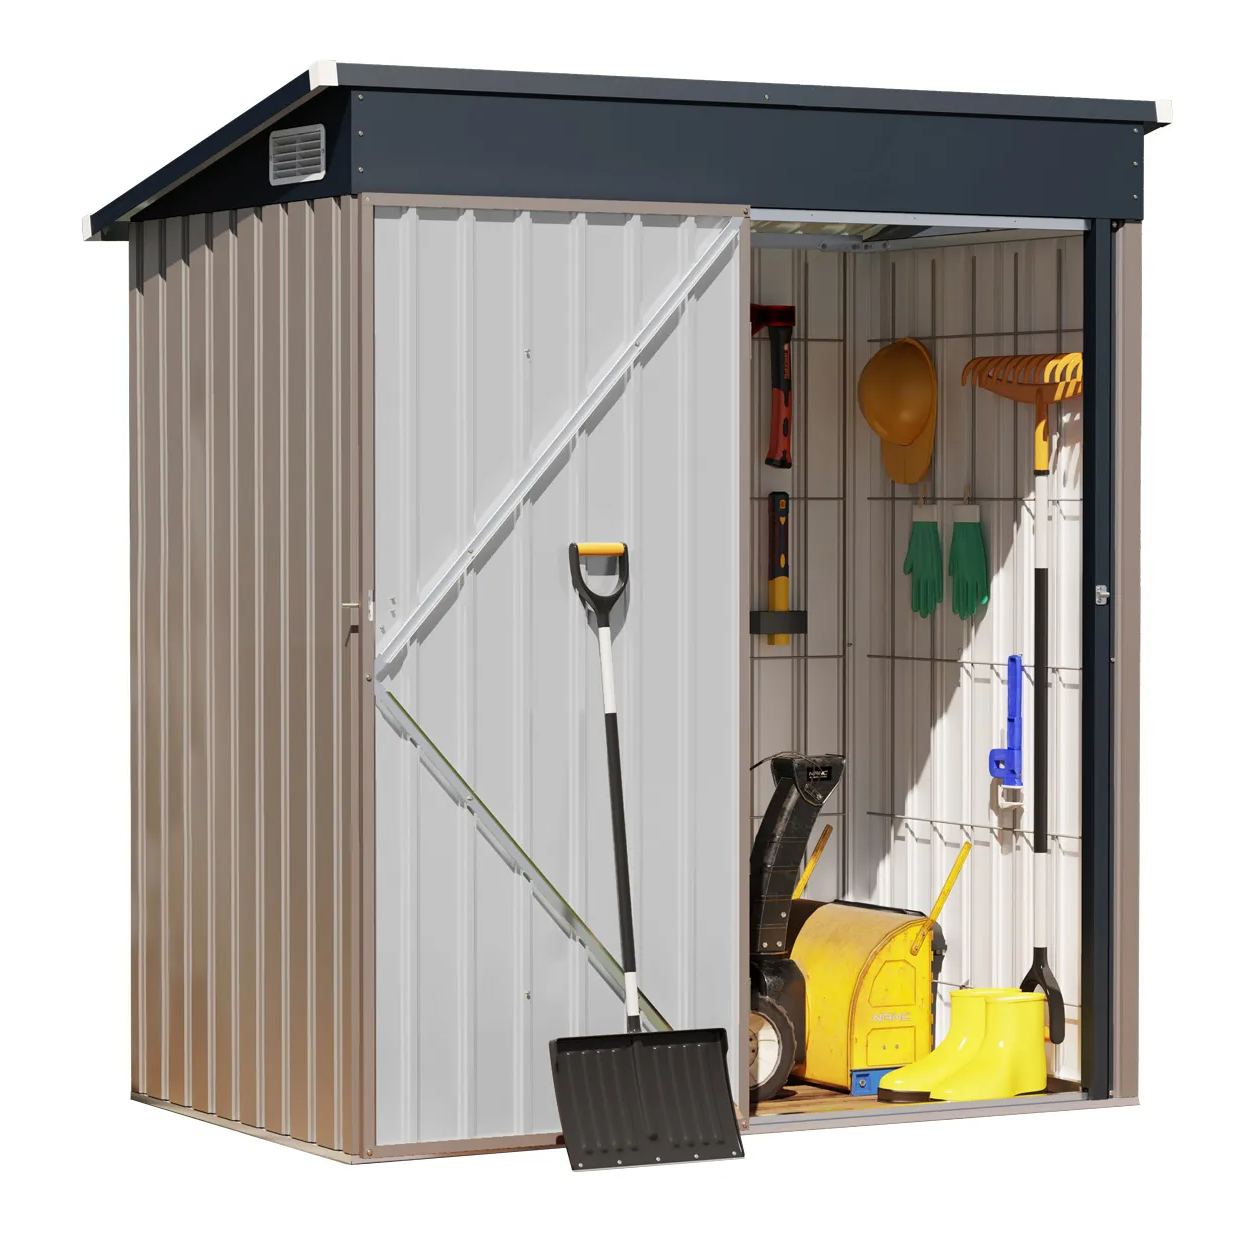 5'x 3' Outdoor Storage Shed Metal Garden Tool Shed for Backyard, Patio, Lawn, Brown | Orange-Casual